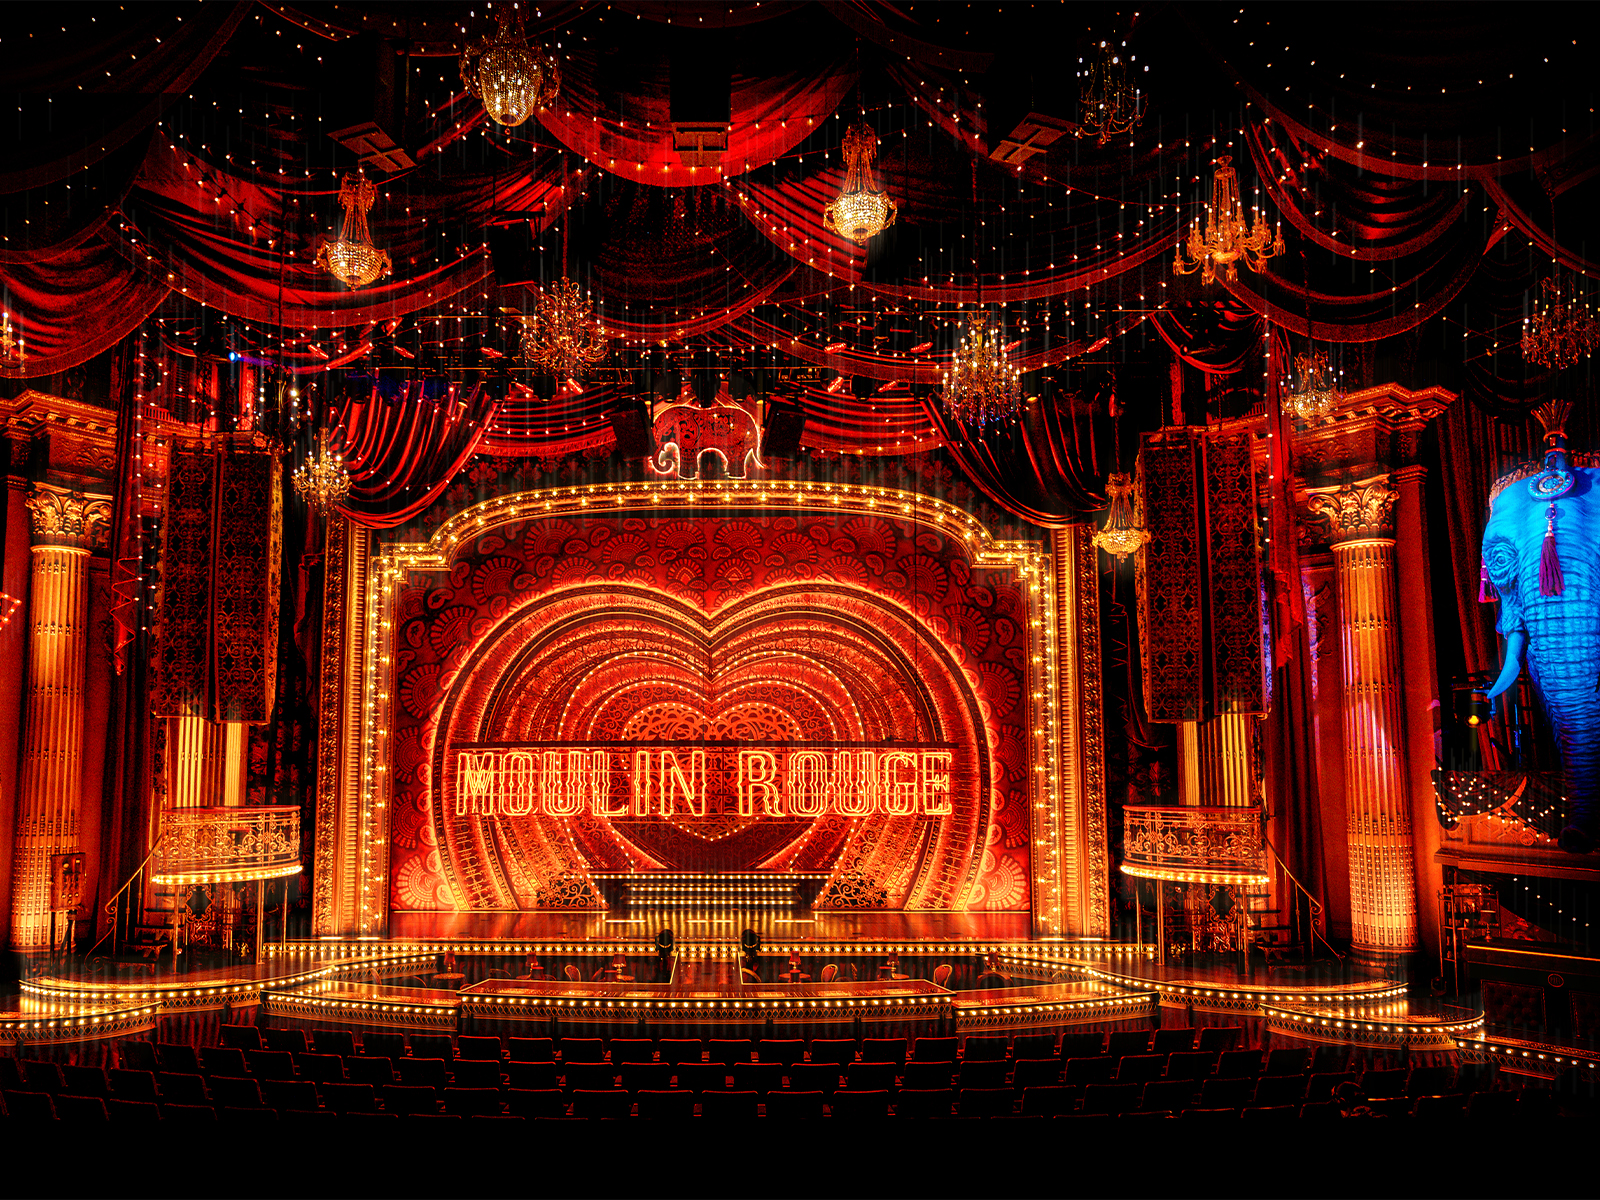 Moulin Rouge! Premieres on Broadway With a Spectacularly Splashy Opening  Night